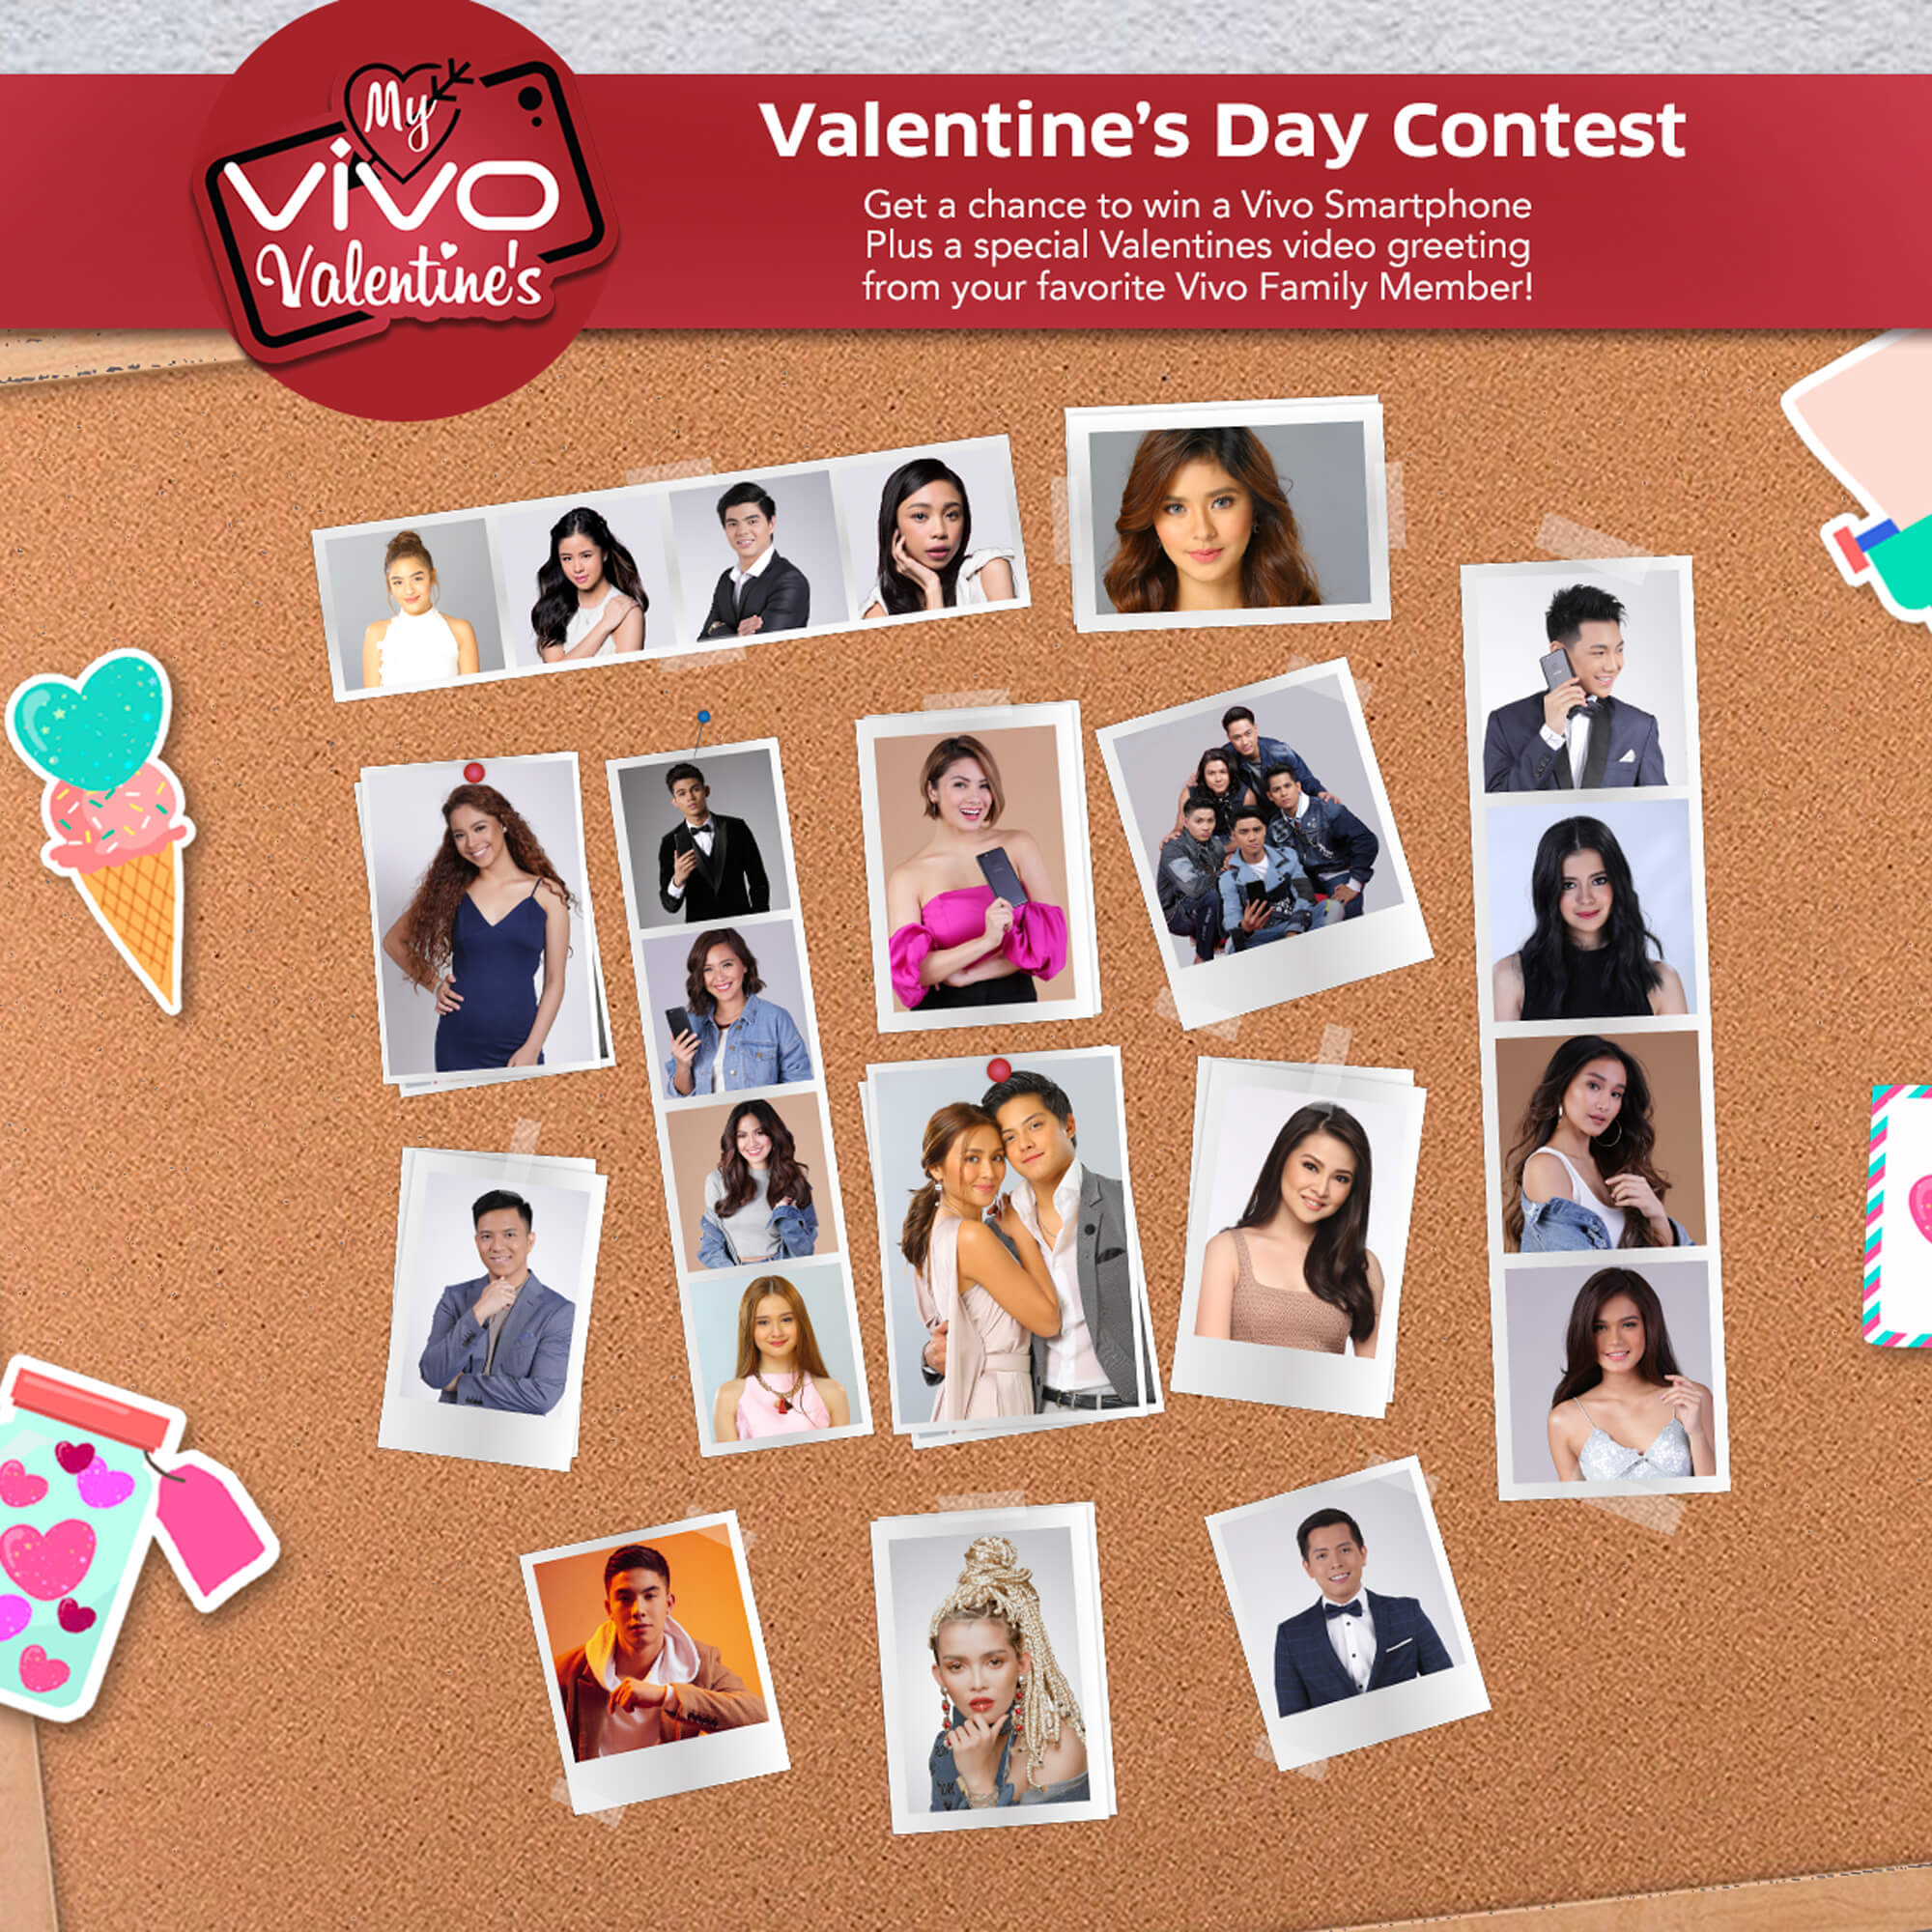 Get a Chance to Win a New Smartphone with Vivo’s Valentine Selfie Contest!